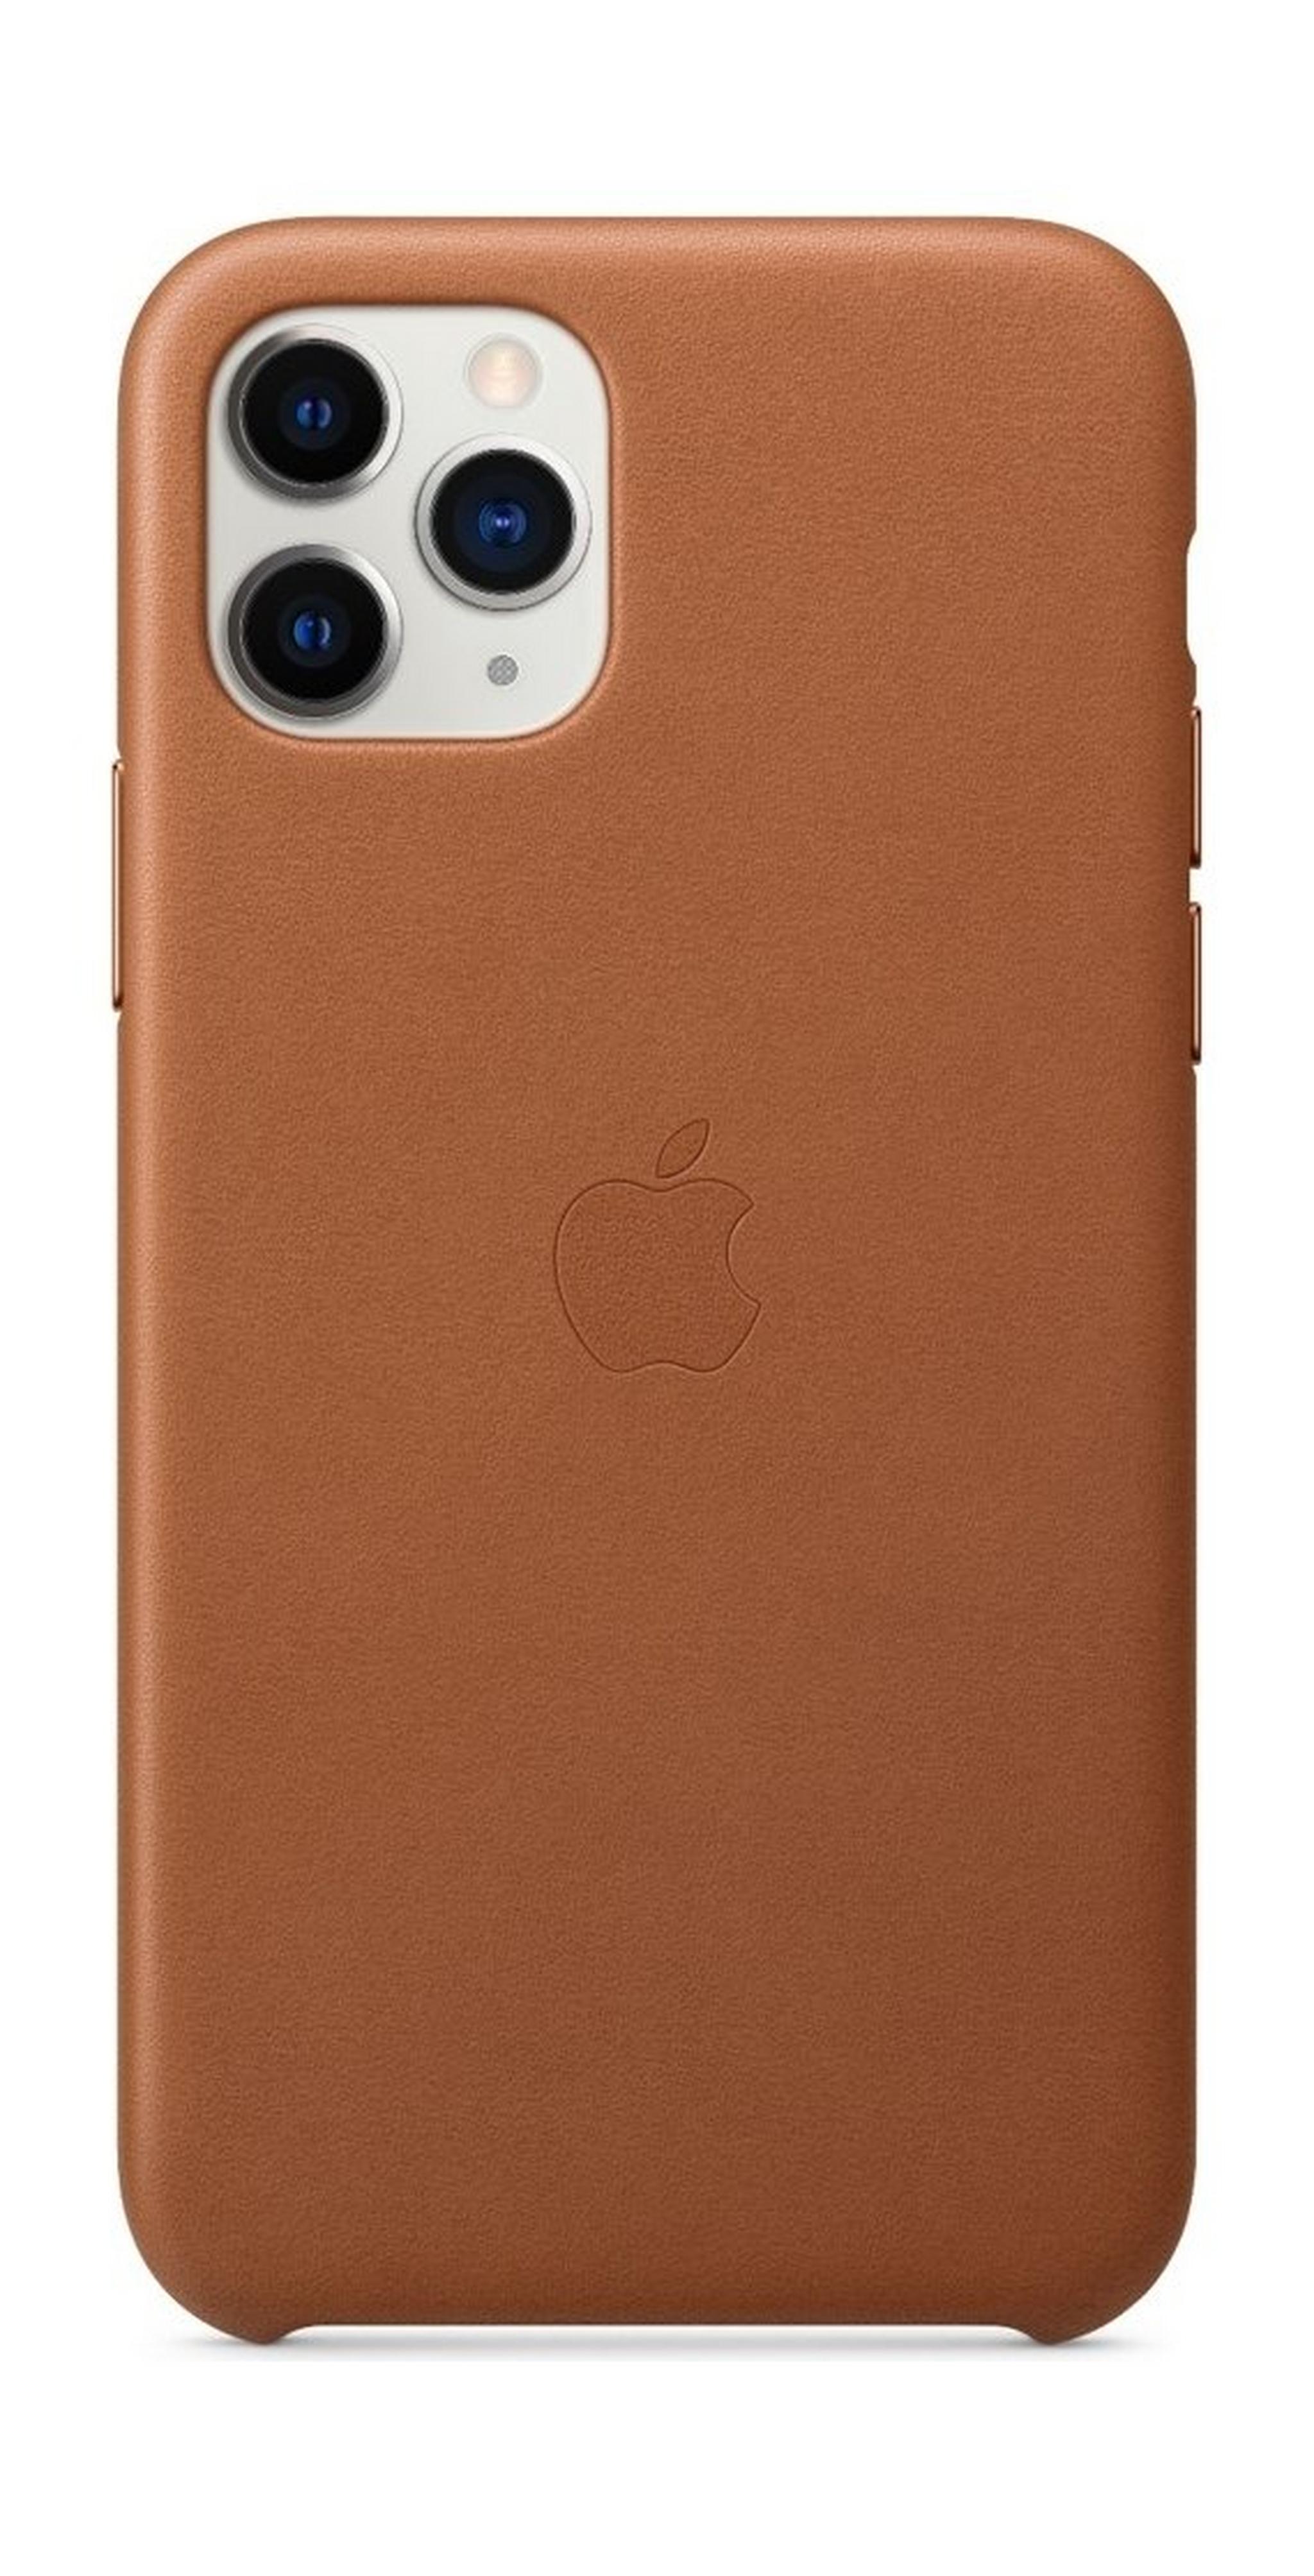 Apple iPhone 11 Pro Max Leather Case - Saddle Brown